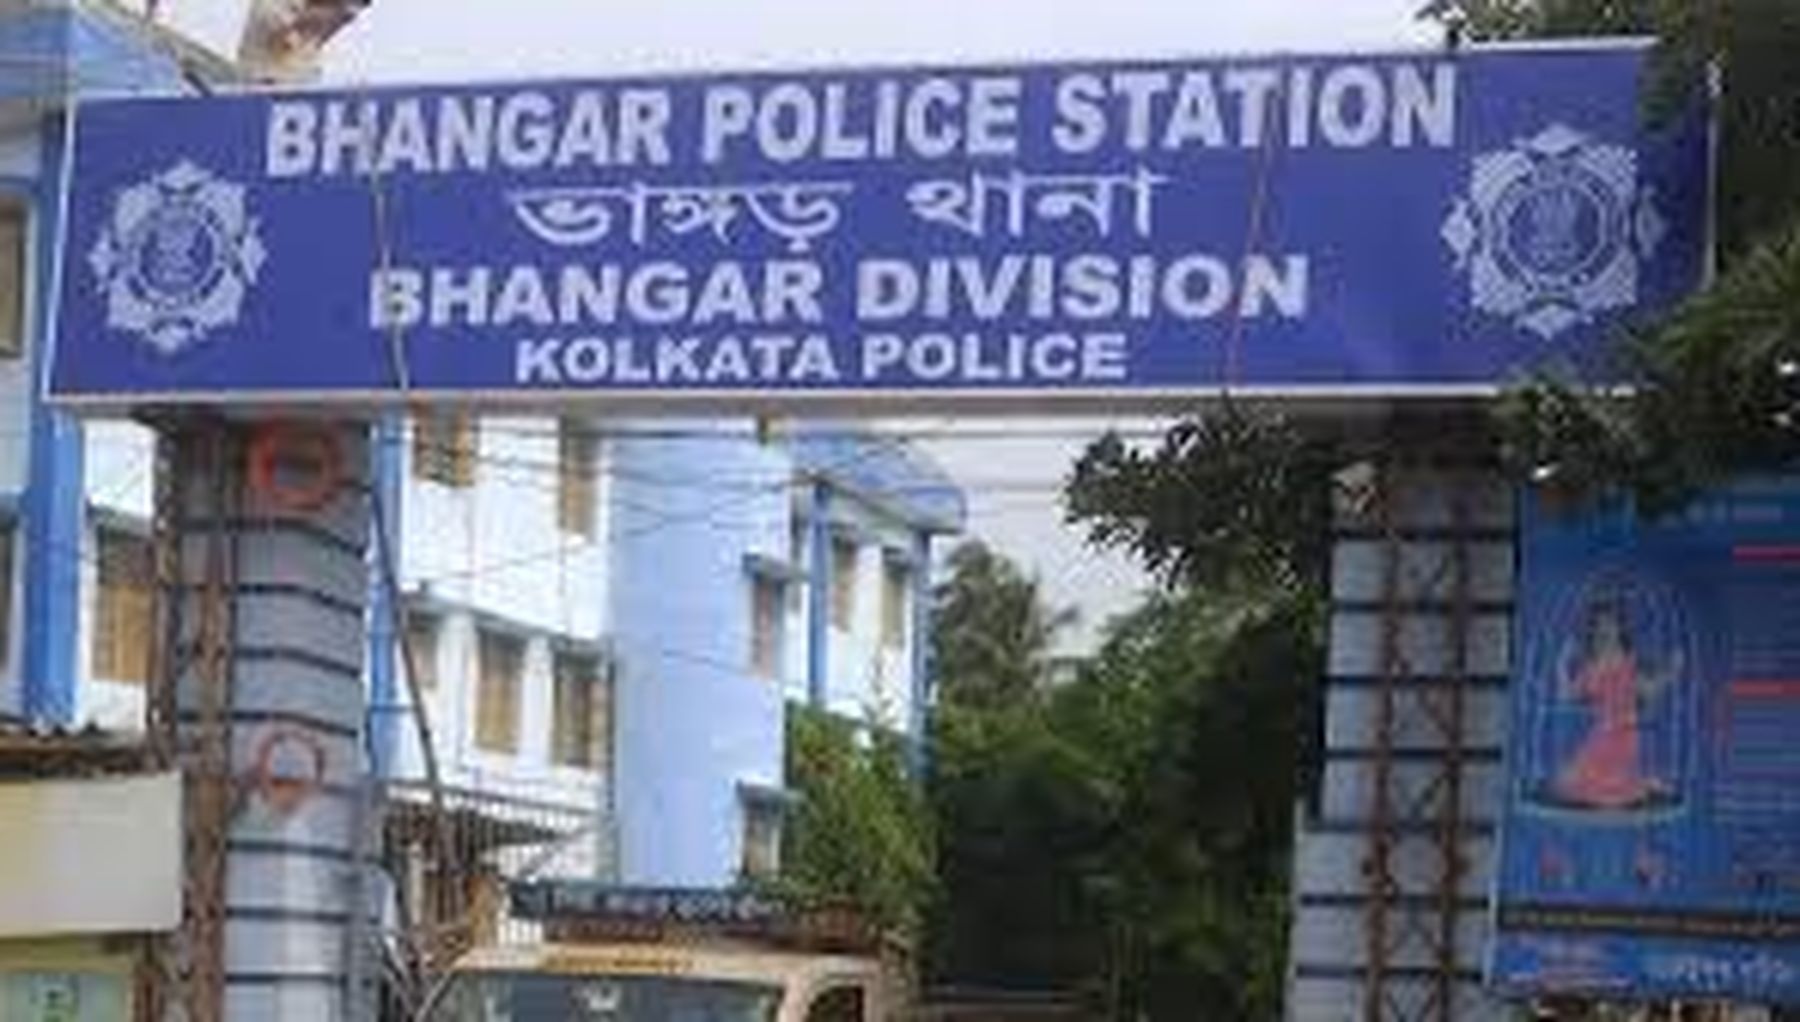 Bhangar police station recovered Rs 2.5 lakh from gas businessman